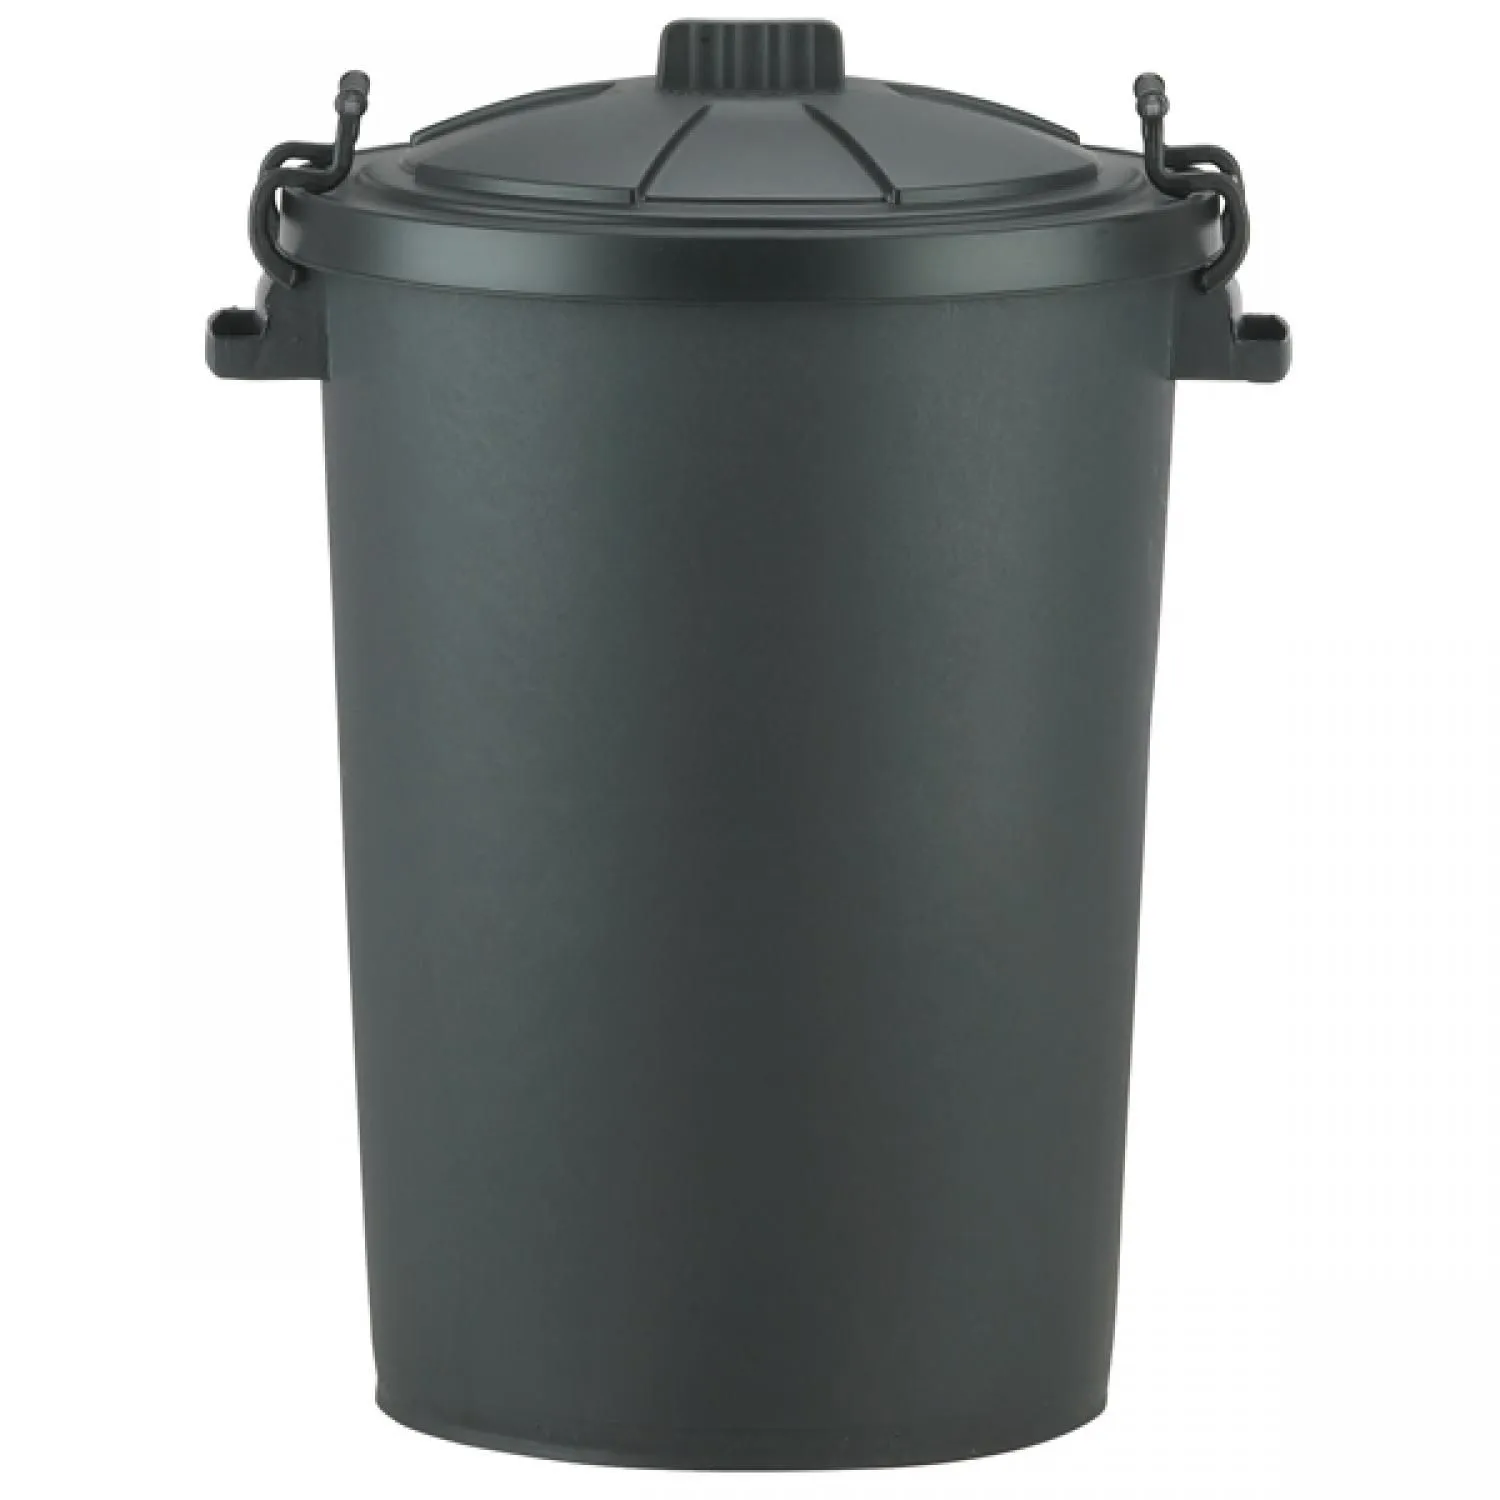 Black Polythene Dustbin With Cover 85 Ltr